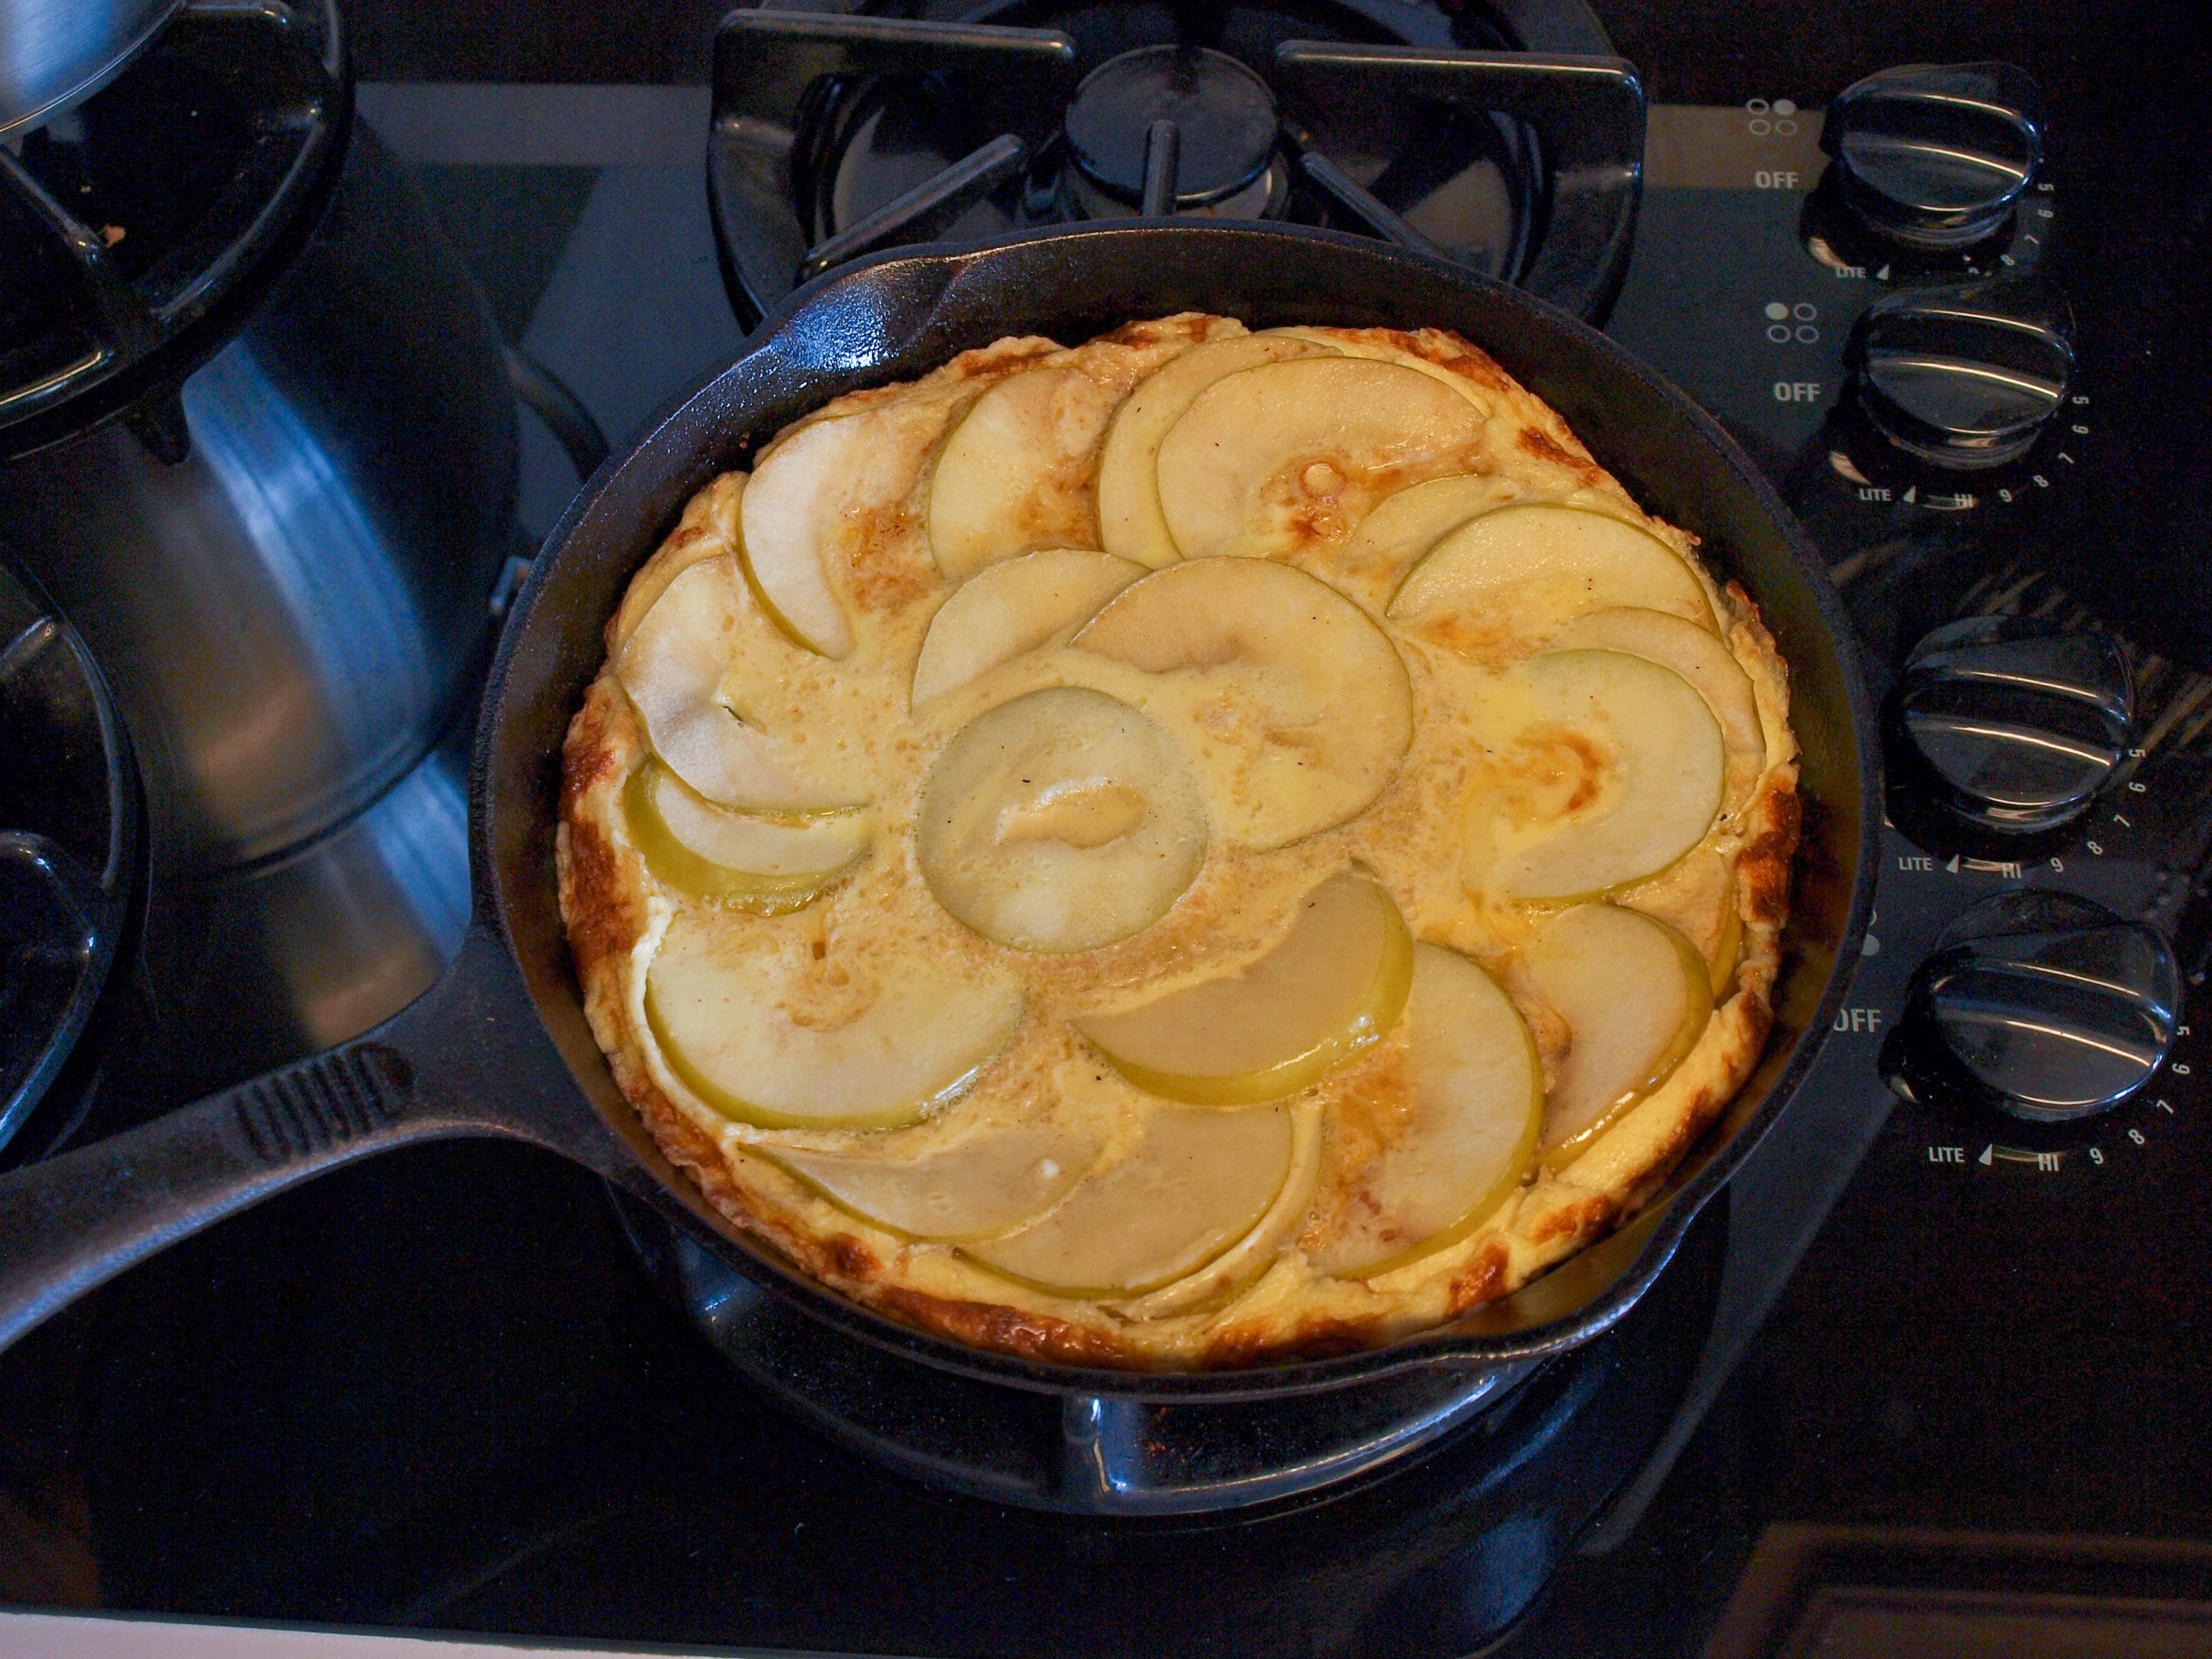 Broiling egg and apple skillet.